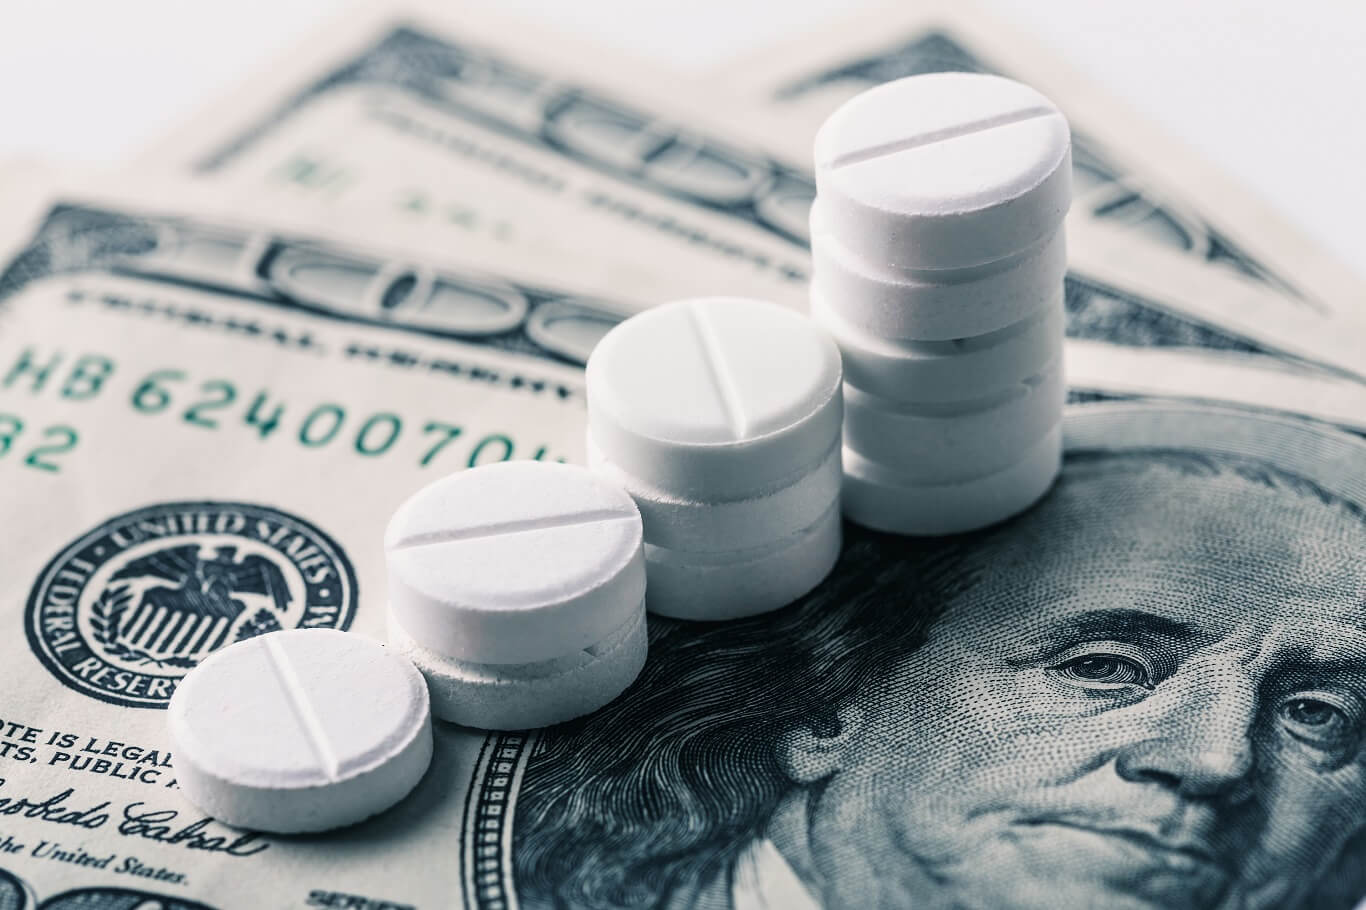 Why are prescription drugs so expensive in the US?